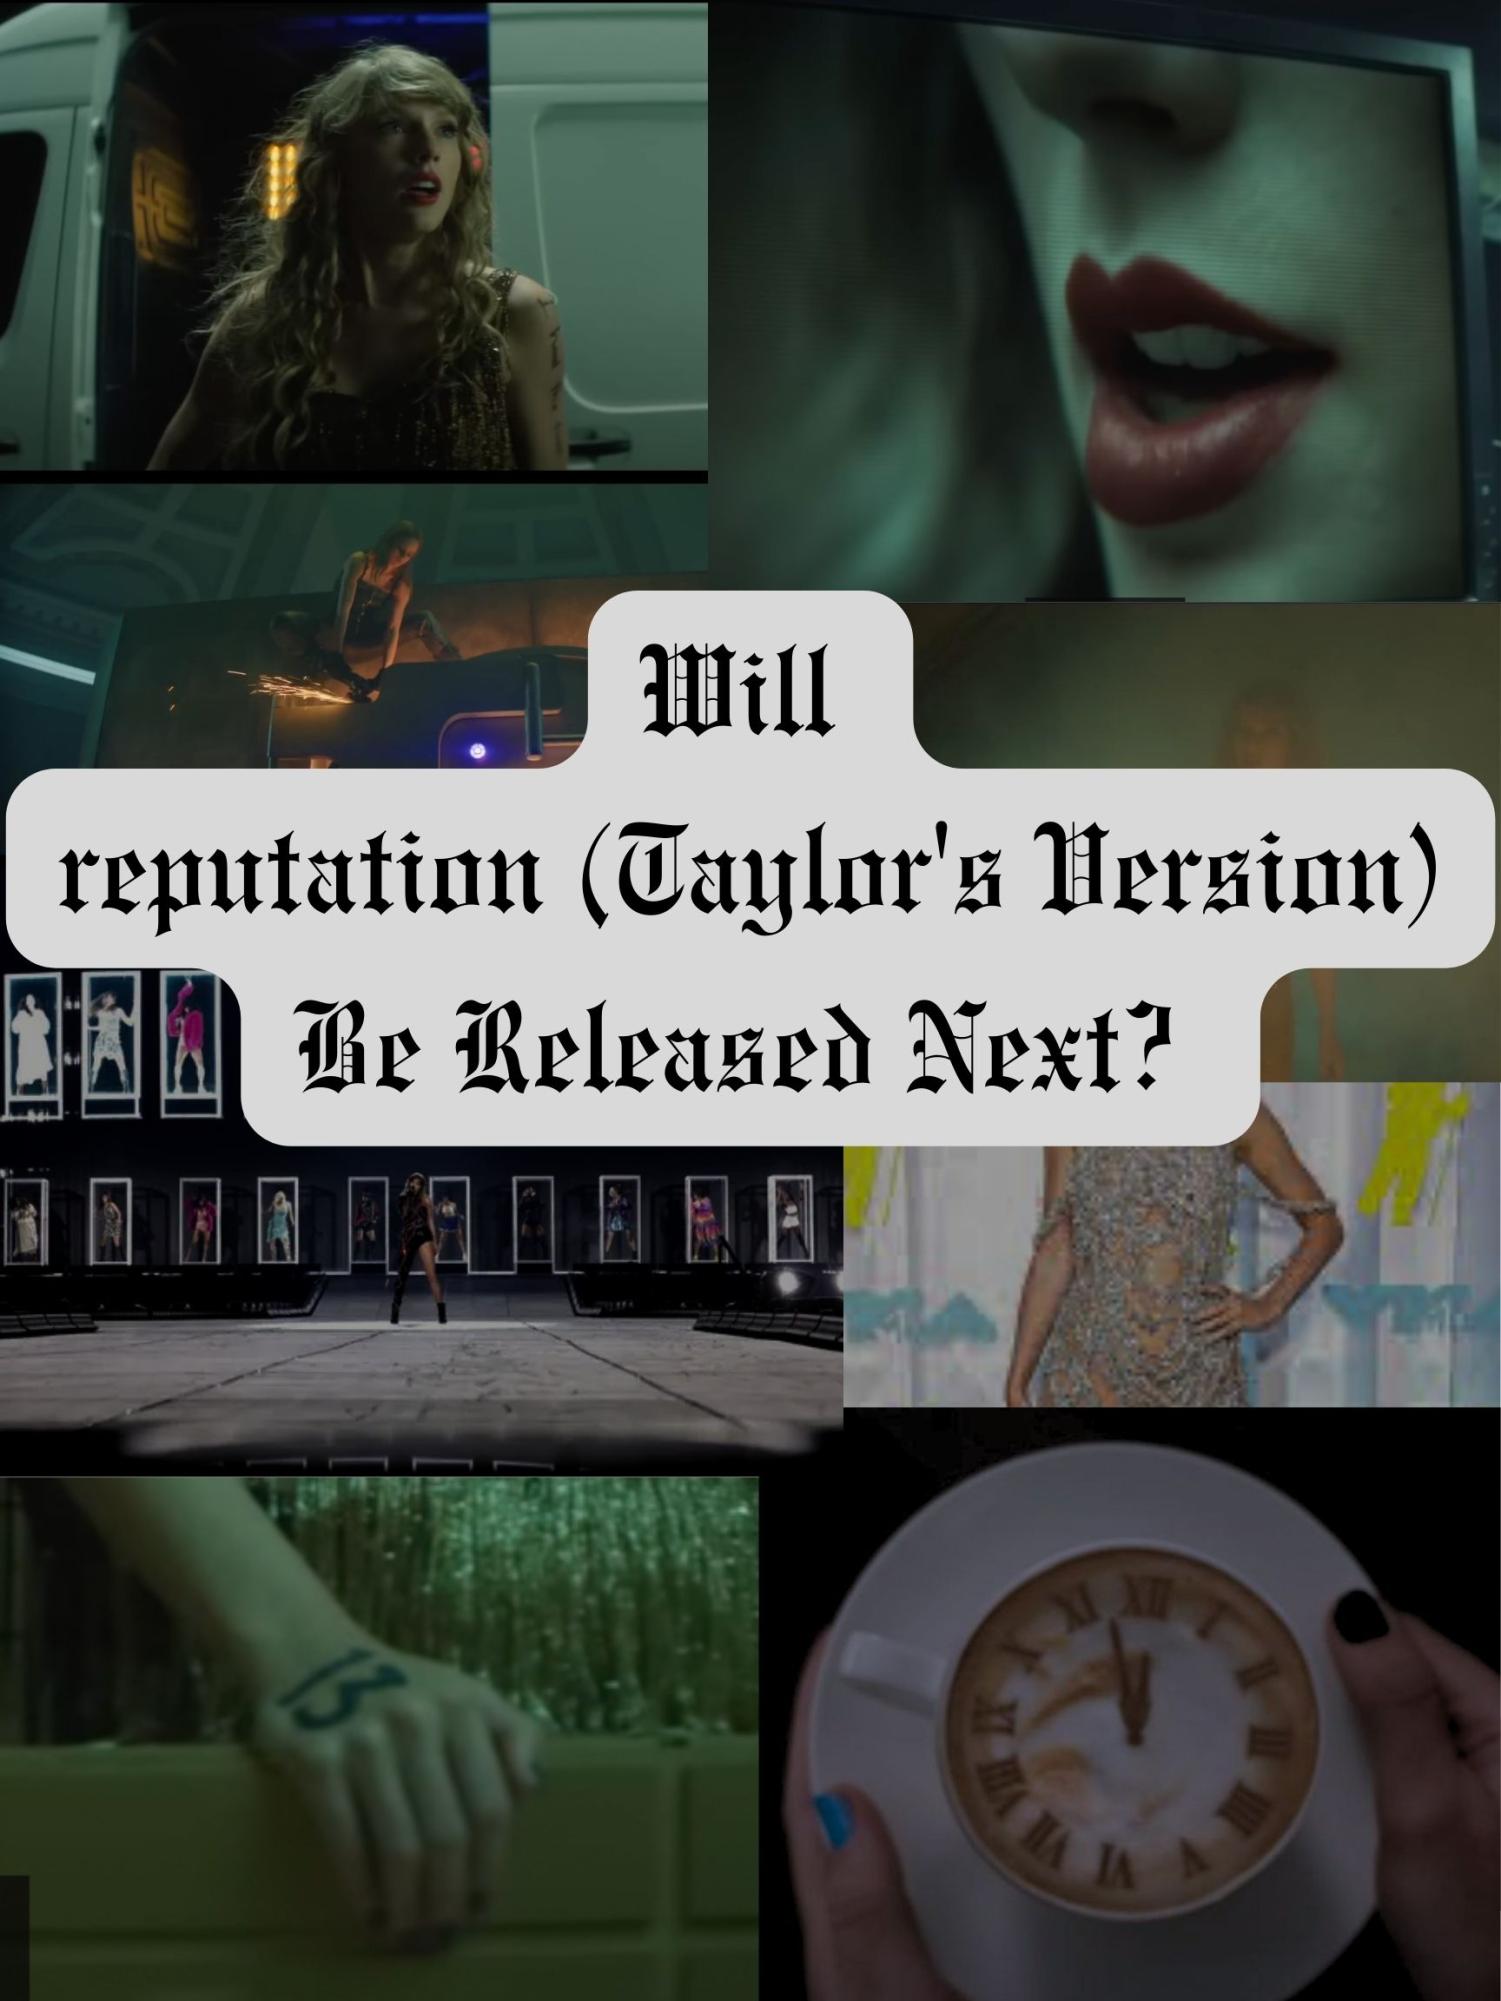 Reputation (Taylor Swift's Version) release date speculation